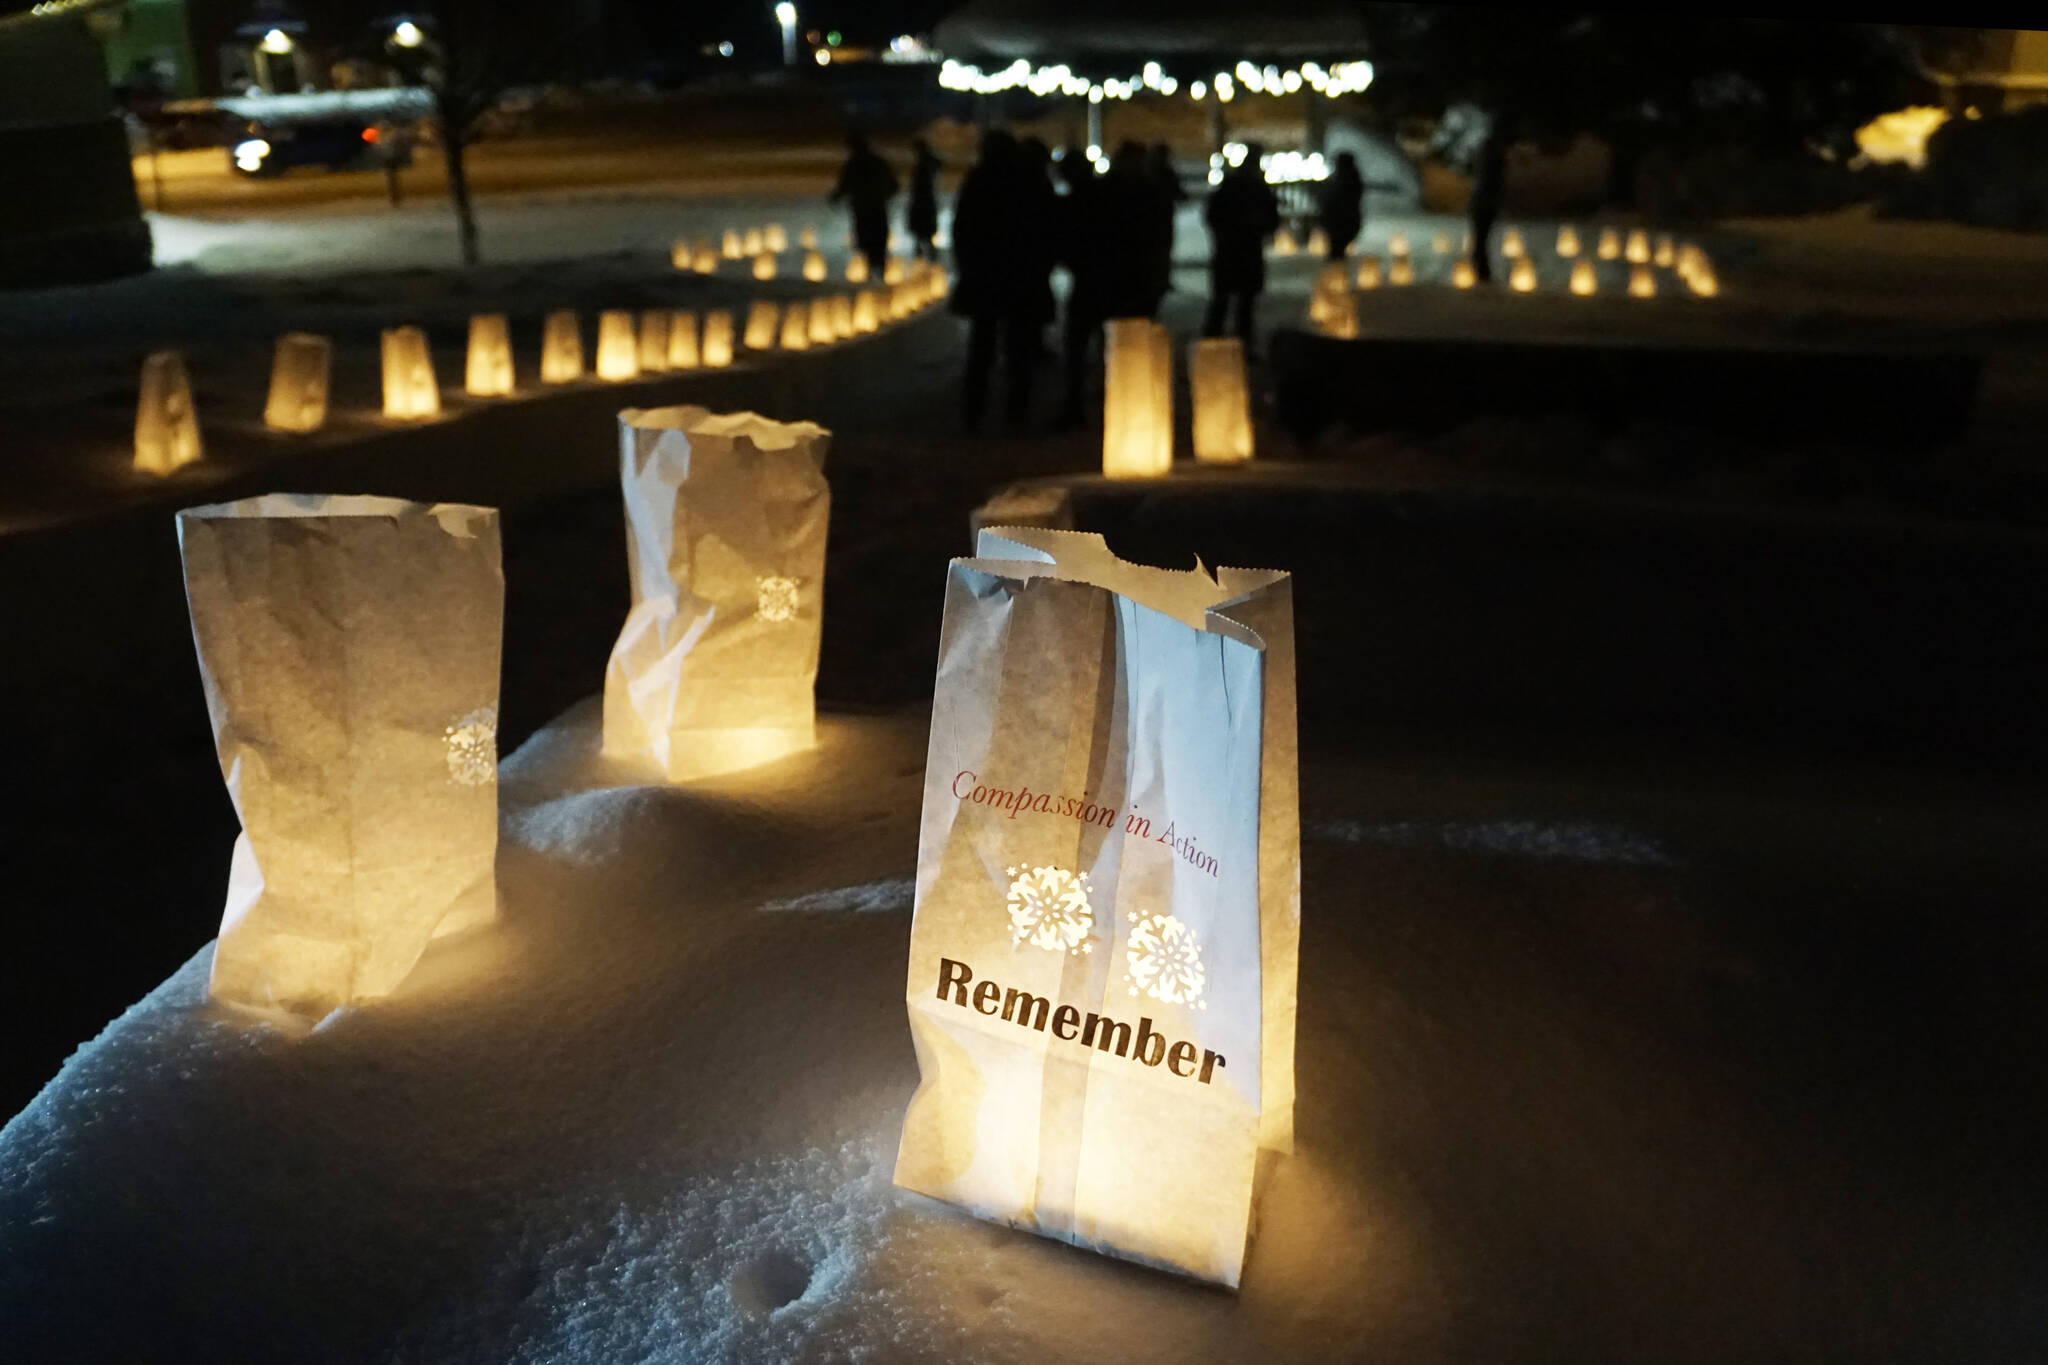 "Remember" is one of the messages on a luminaria onThursday, Dec. 16, 2021, for Hospice of Homer's "LIght Up a Life" event at WKFL Park in Homer, Alaska. (Photo by Michael Armstrong/Homer News)